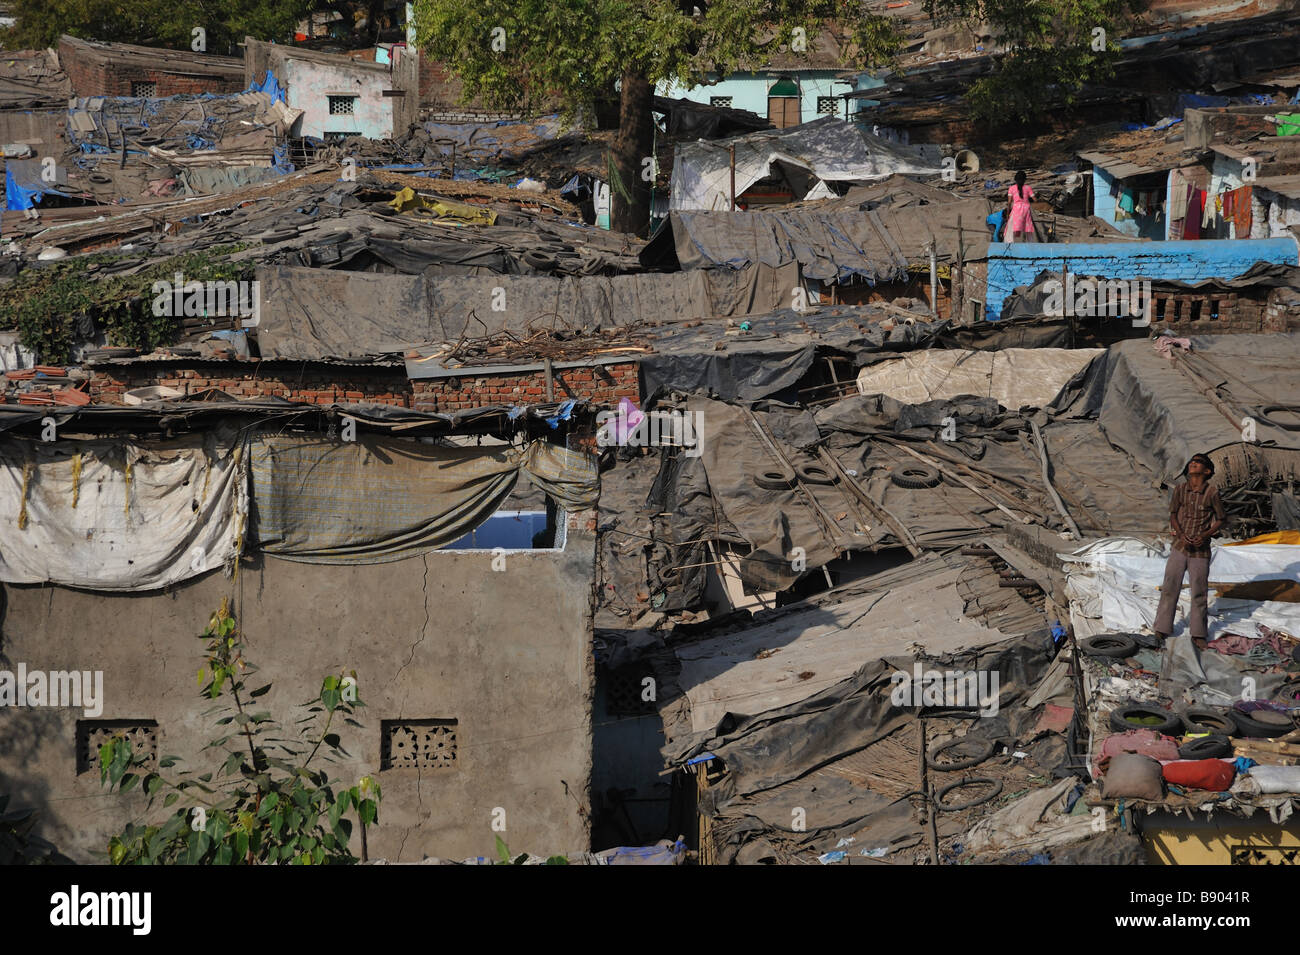 Children standing on the roofs of slum dwellings in Hyderabad, India. Stock Photo